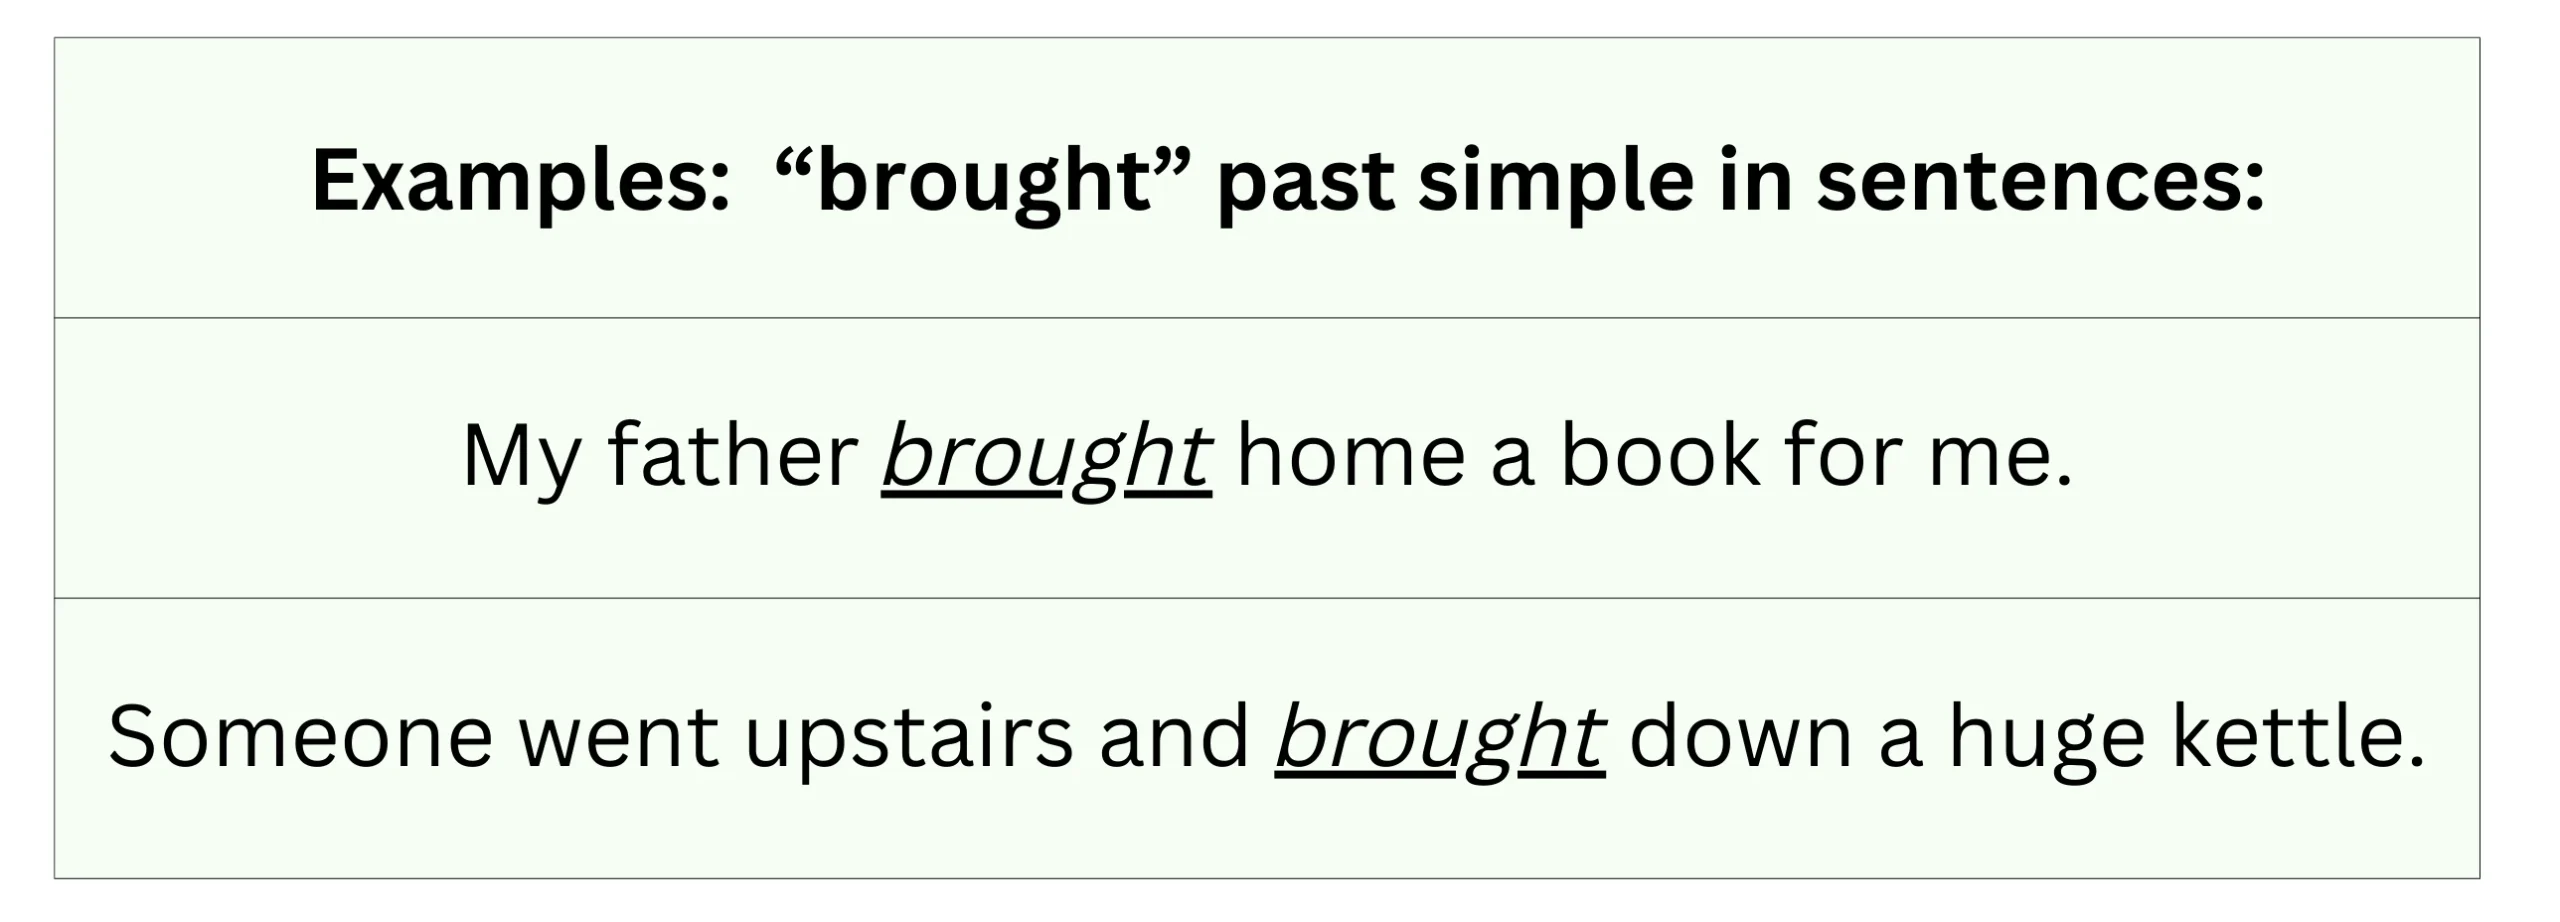 Examples of "brought" in the past tense.